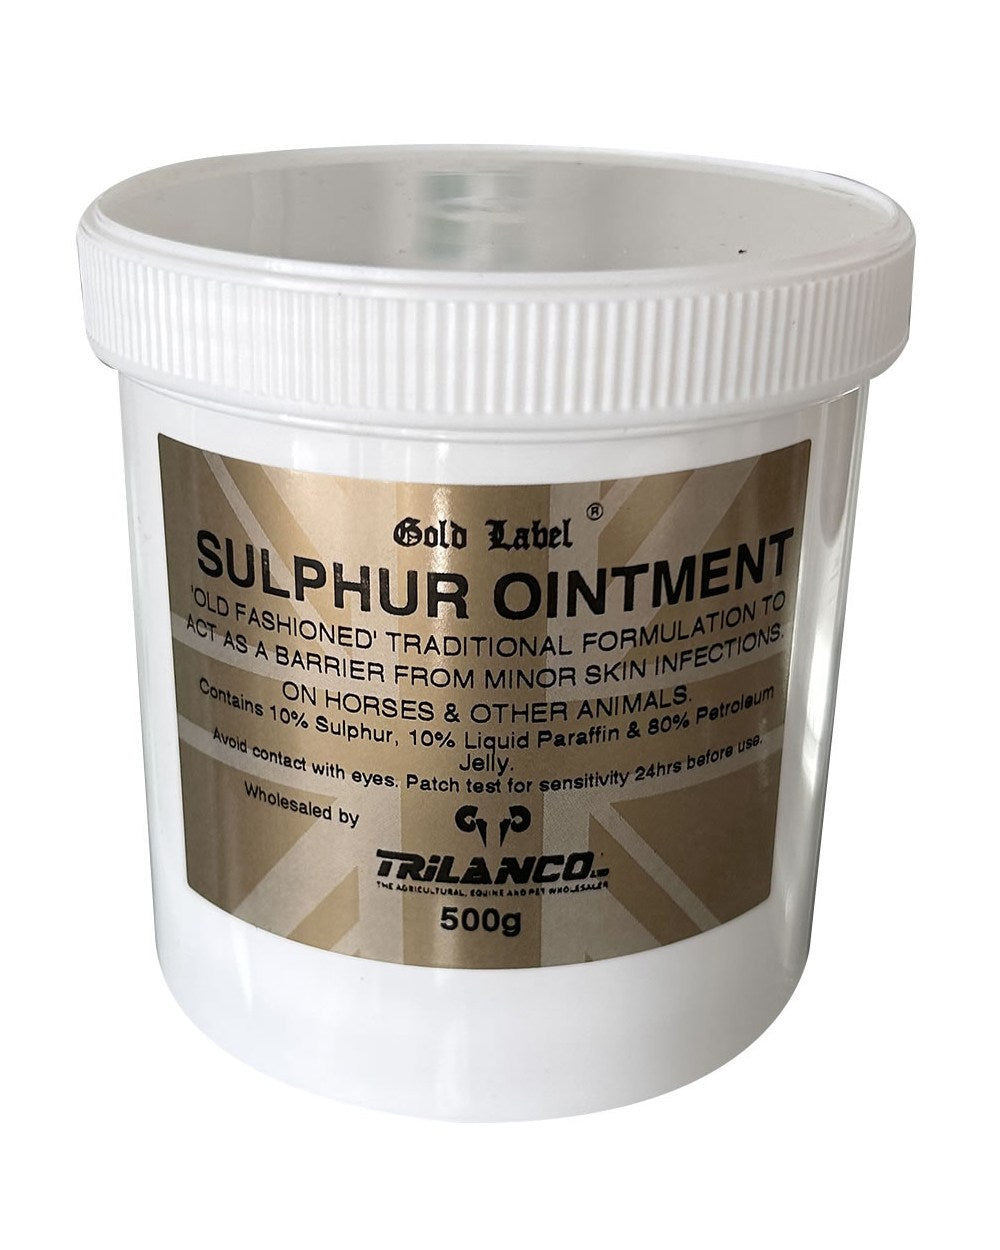 Gold Label Sulphur Ointment On A White Background